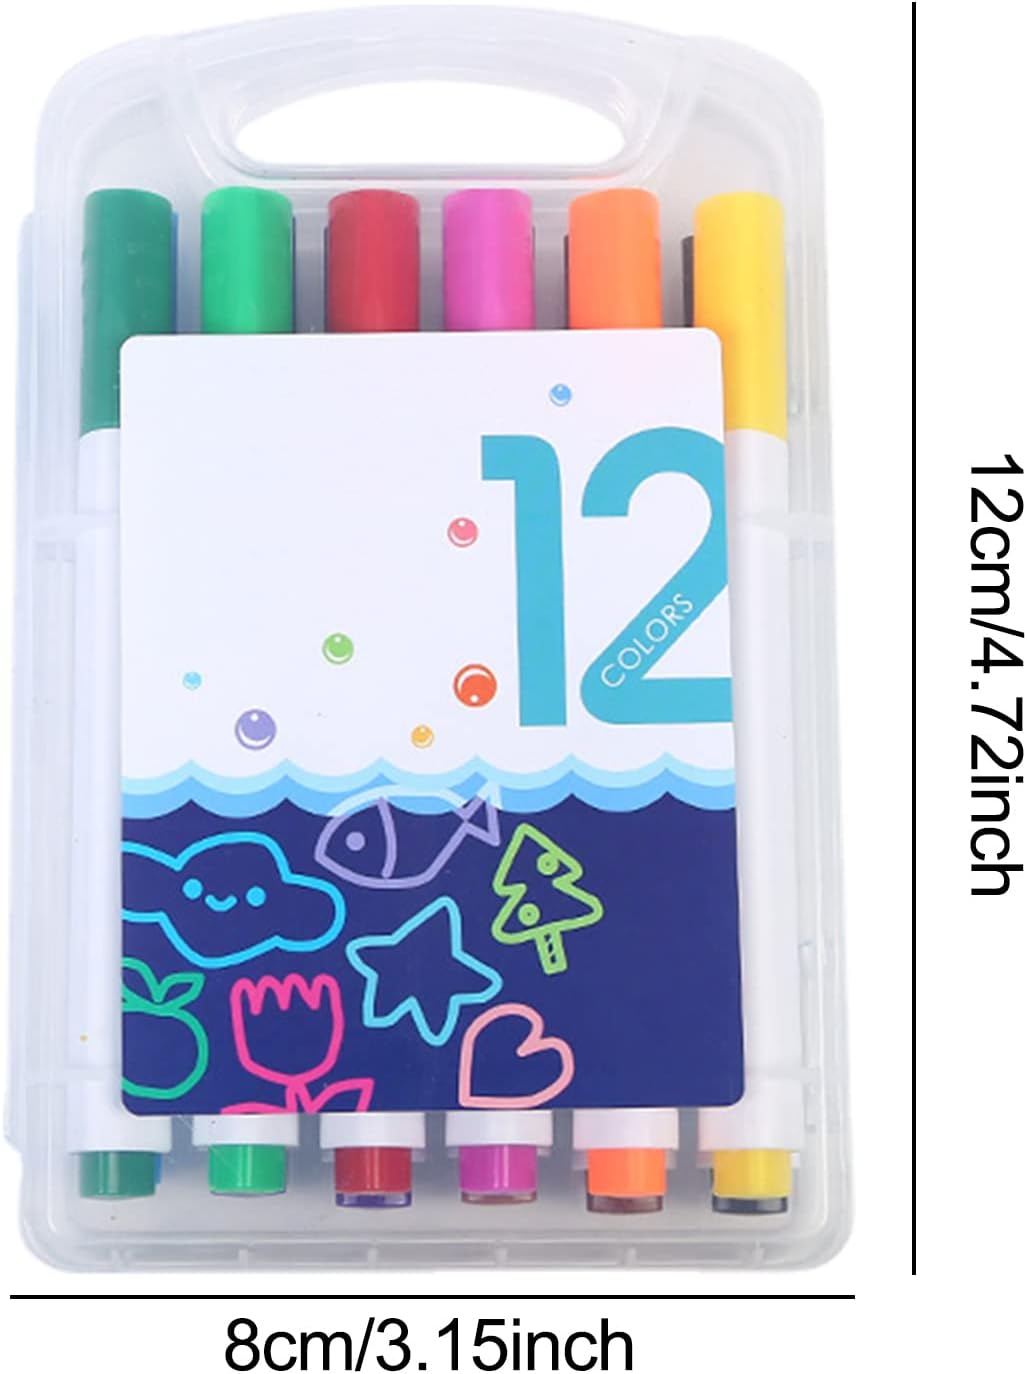 Magical Water Painting Pen - 7-Color Magical Floating Water Painting Pen